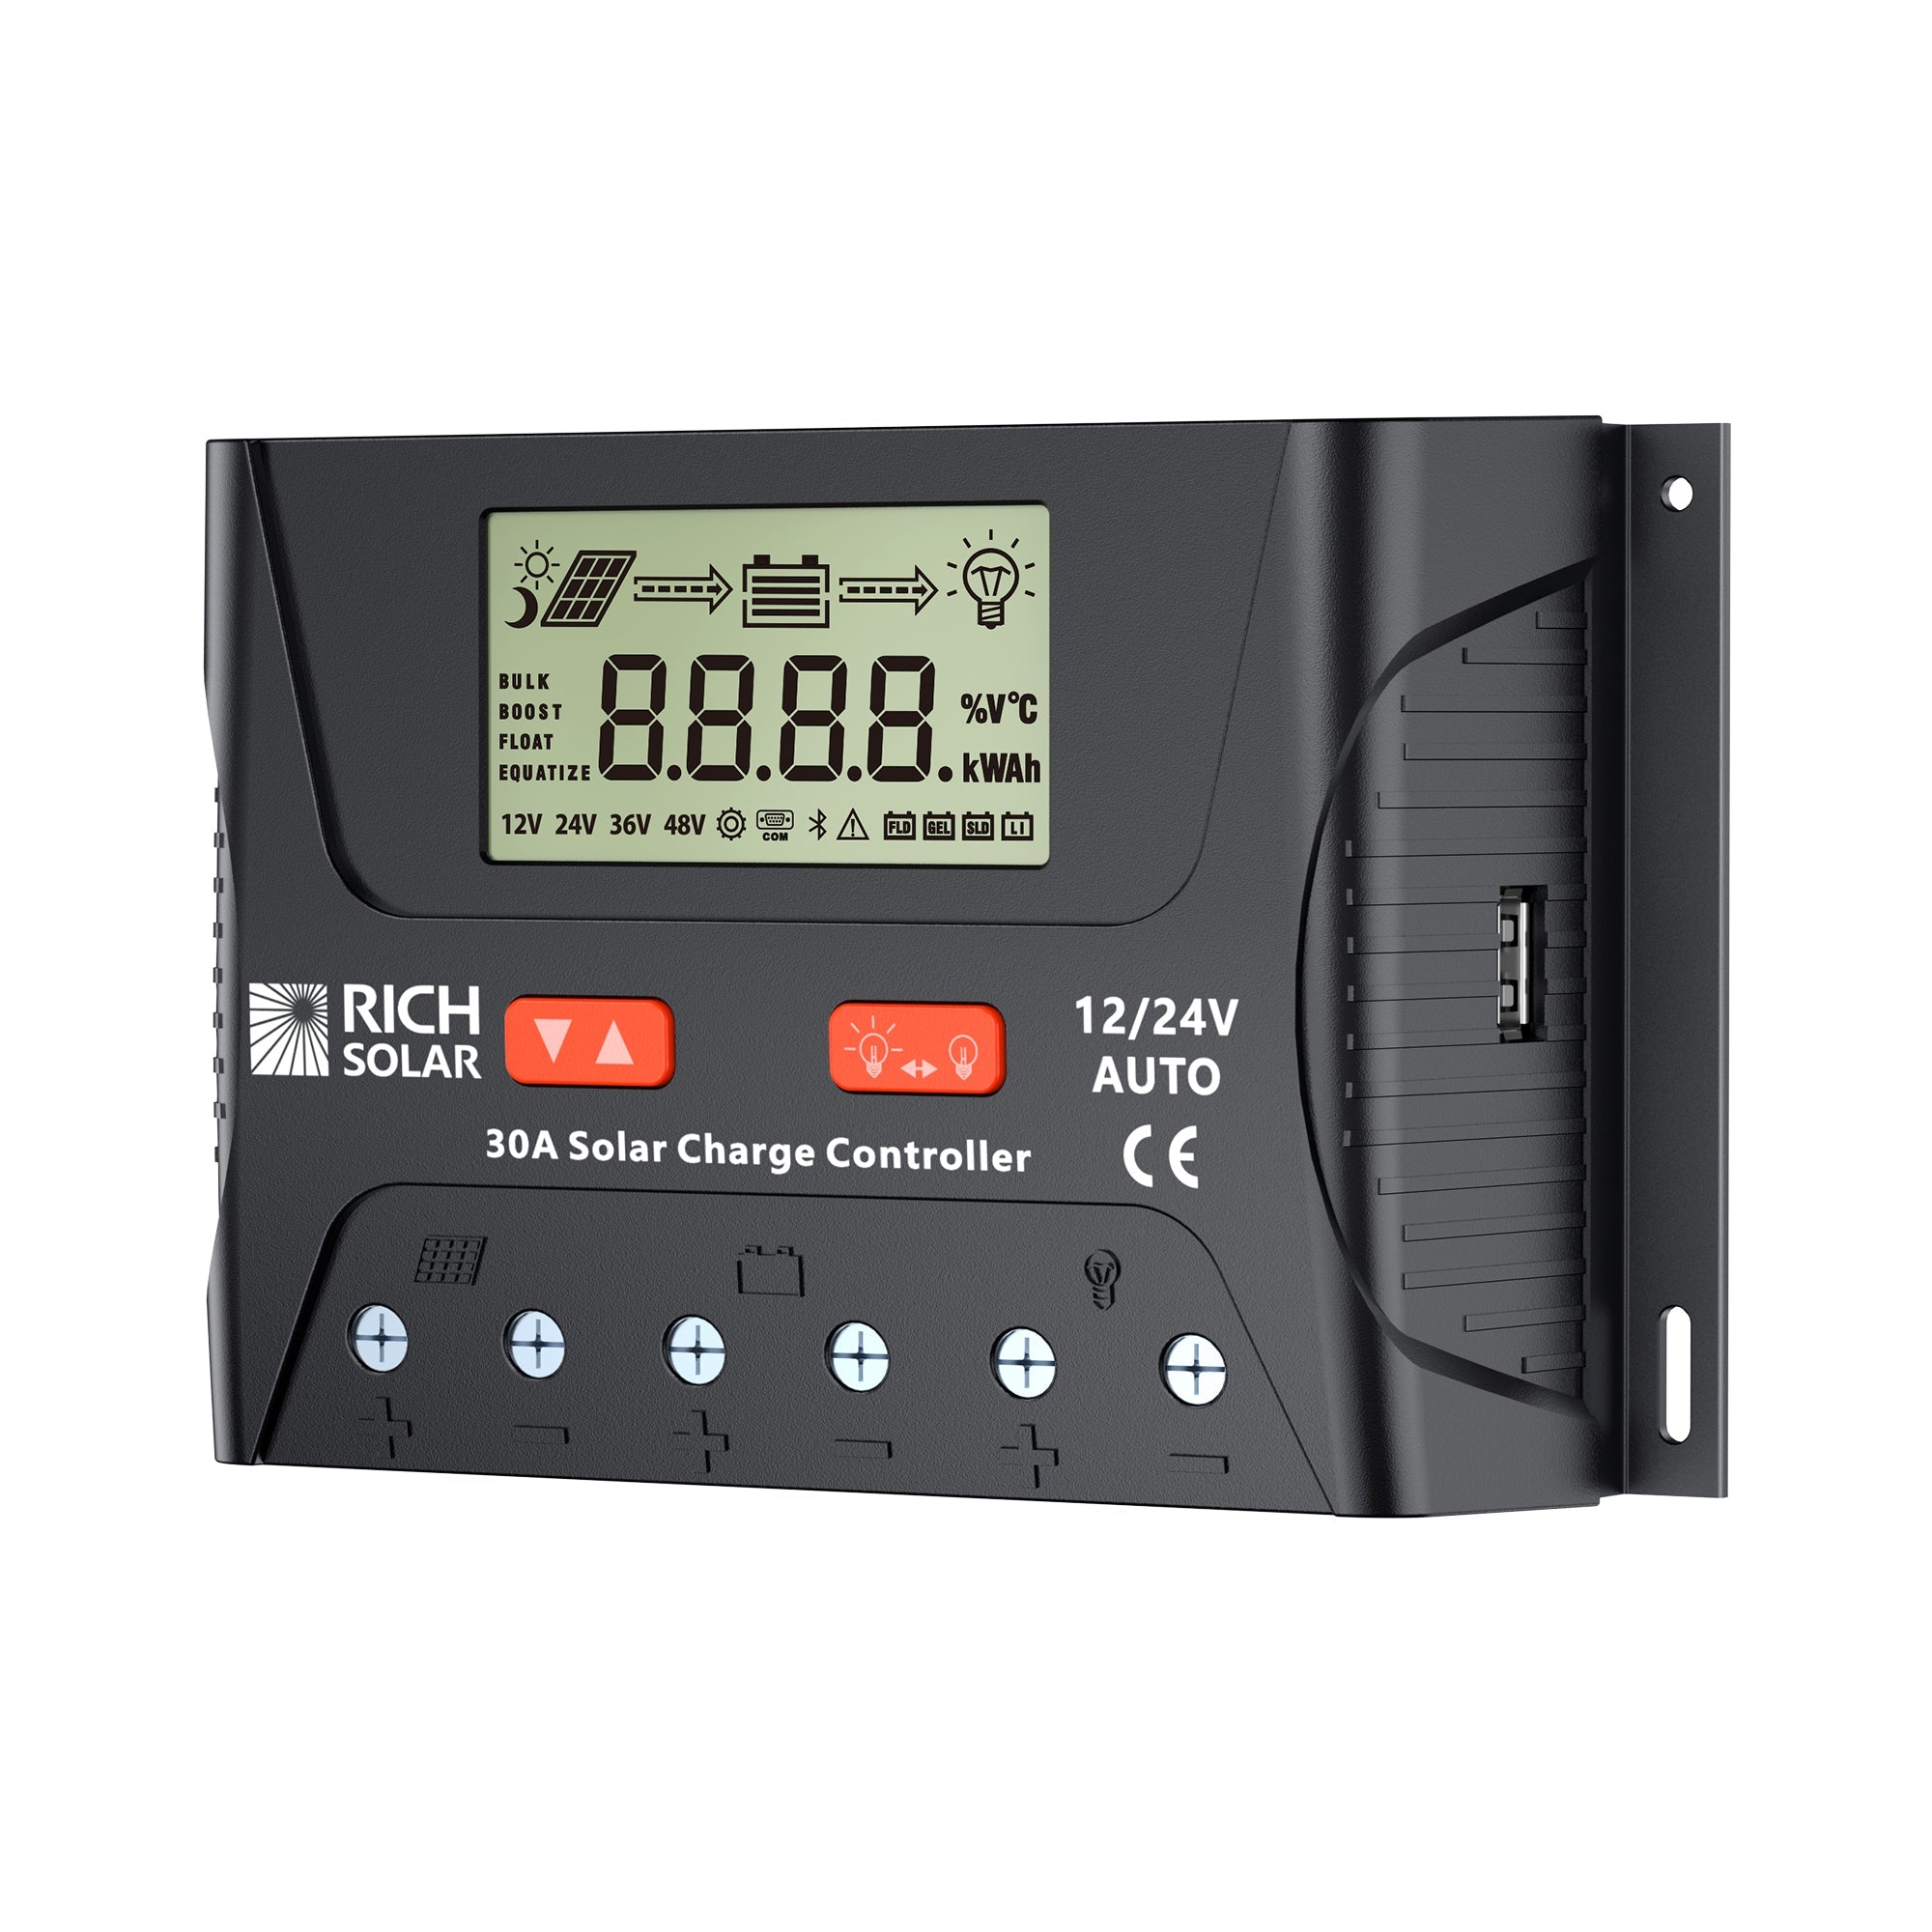 RICH SOLAR 30 Amp PWM Solar Charge Controller - Solar Generators and Power Stations Plus